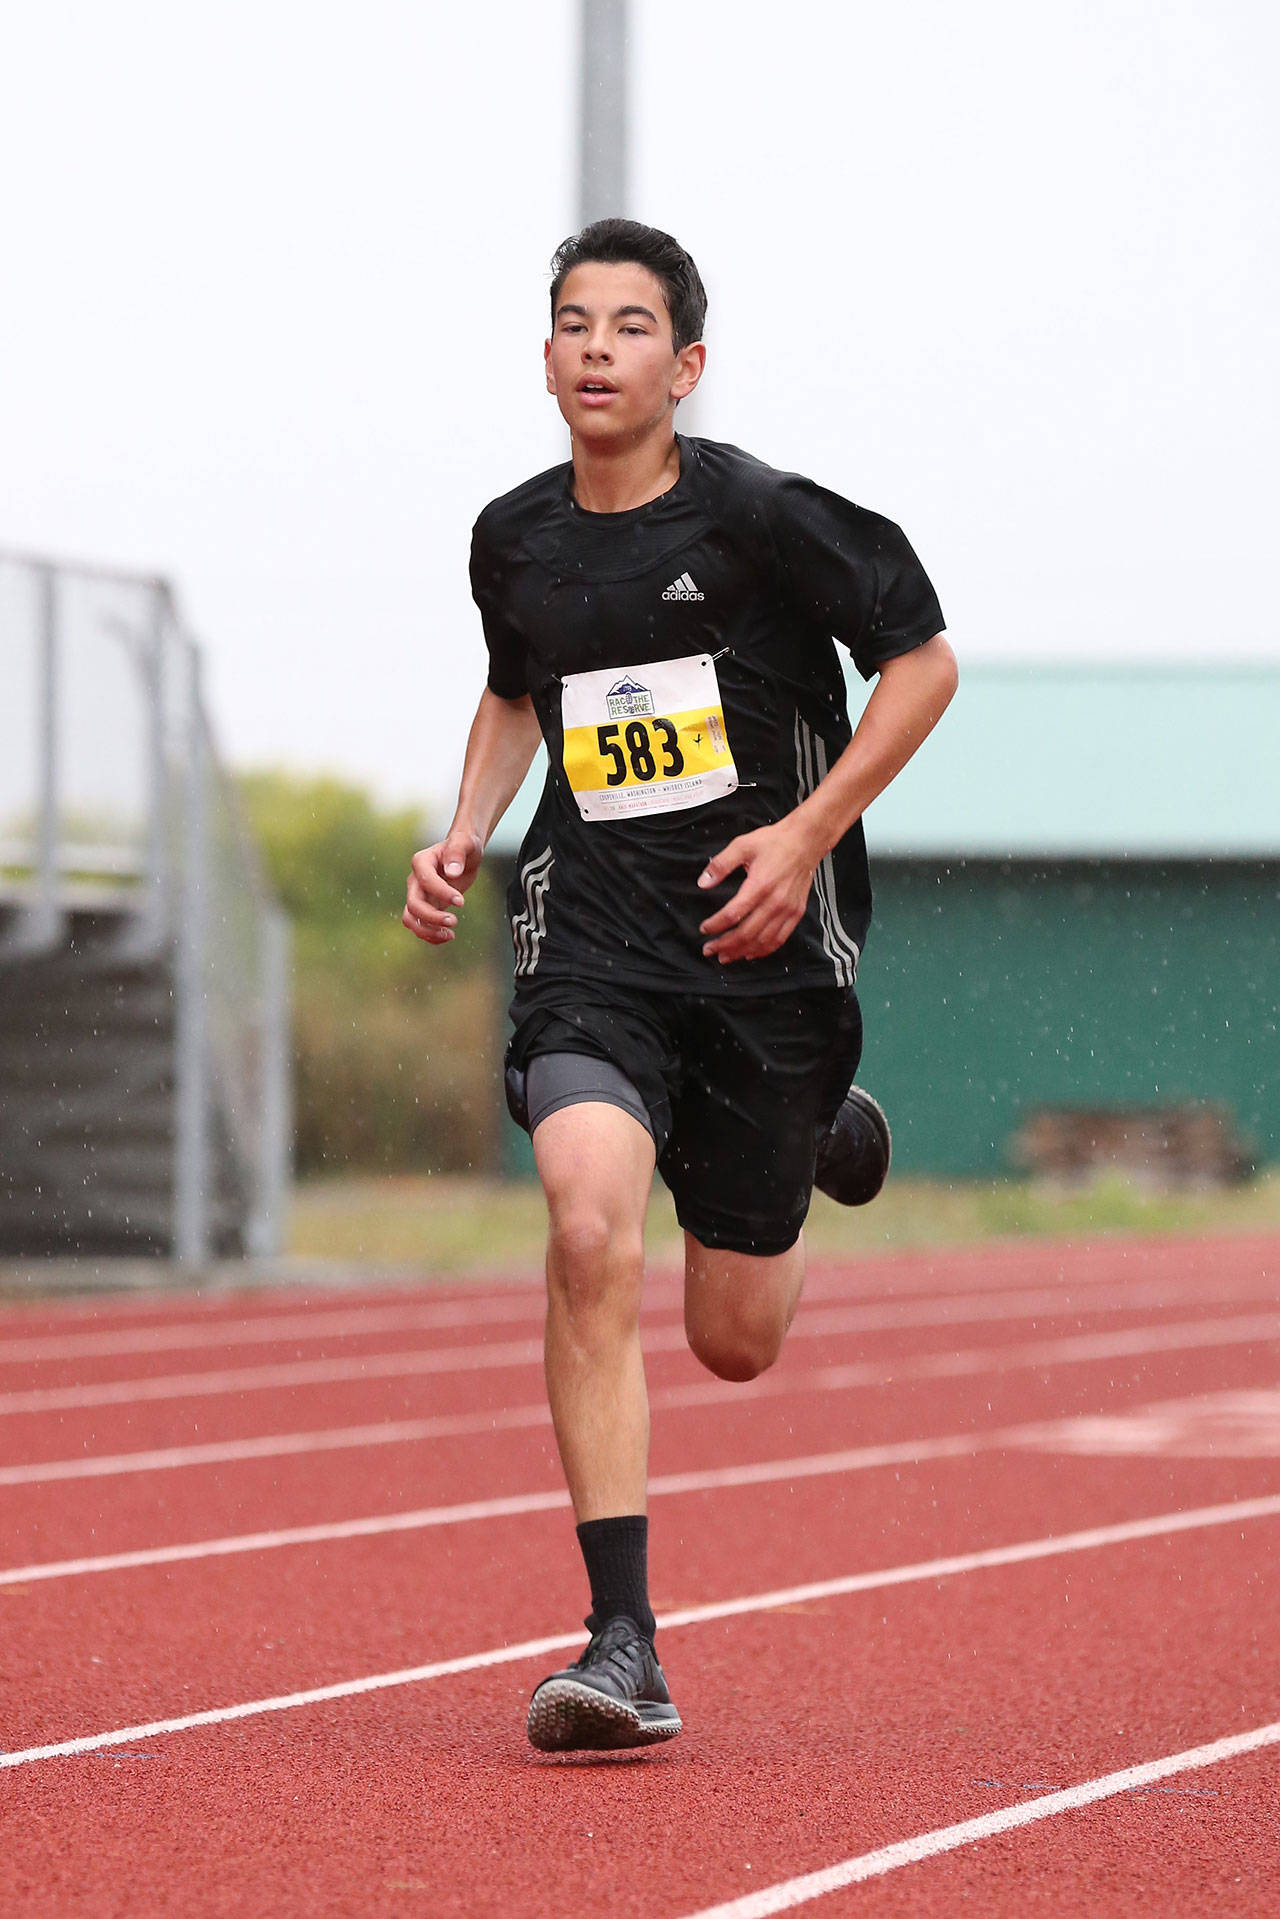 Oak Harbor’s Jacob Pearson finished first in the 5K at the Race the Reserve Saturday.(Photo by John Fisken)